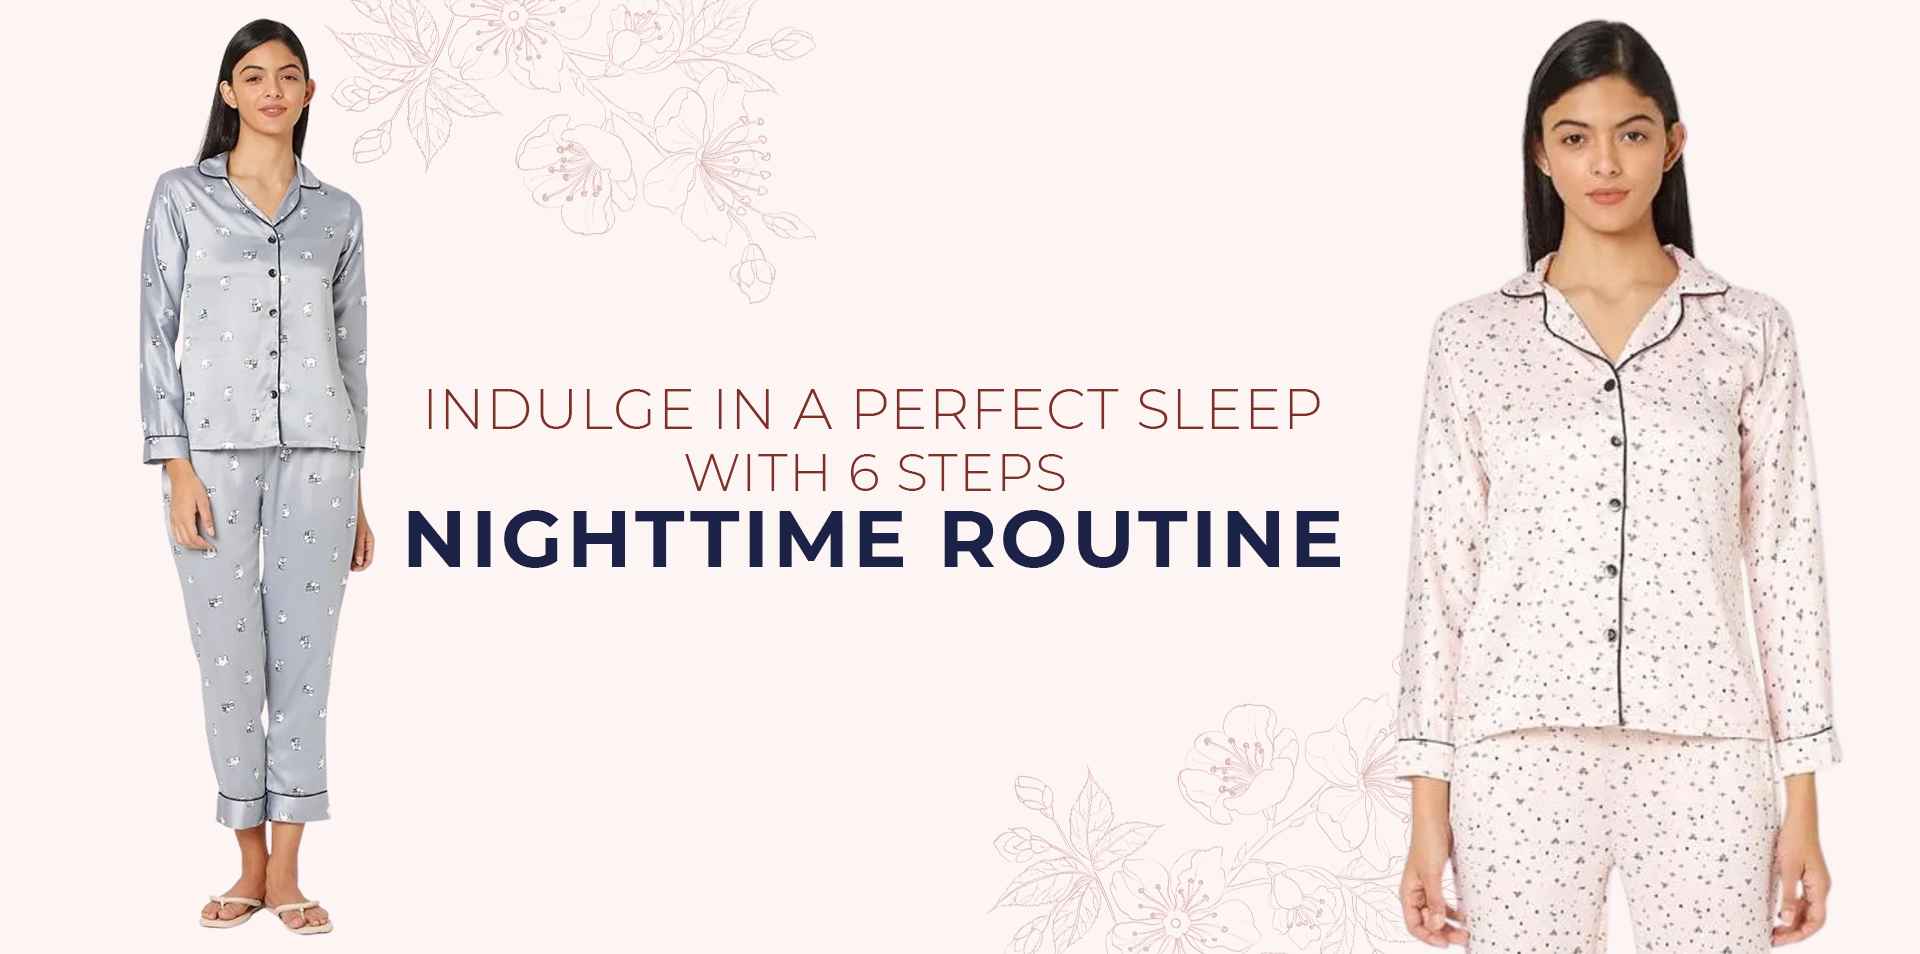 Indulge in a perfect sleep with 6 steps nighttime routine